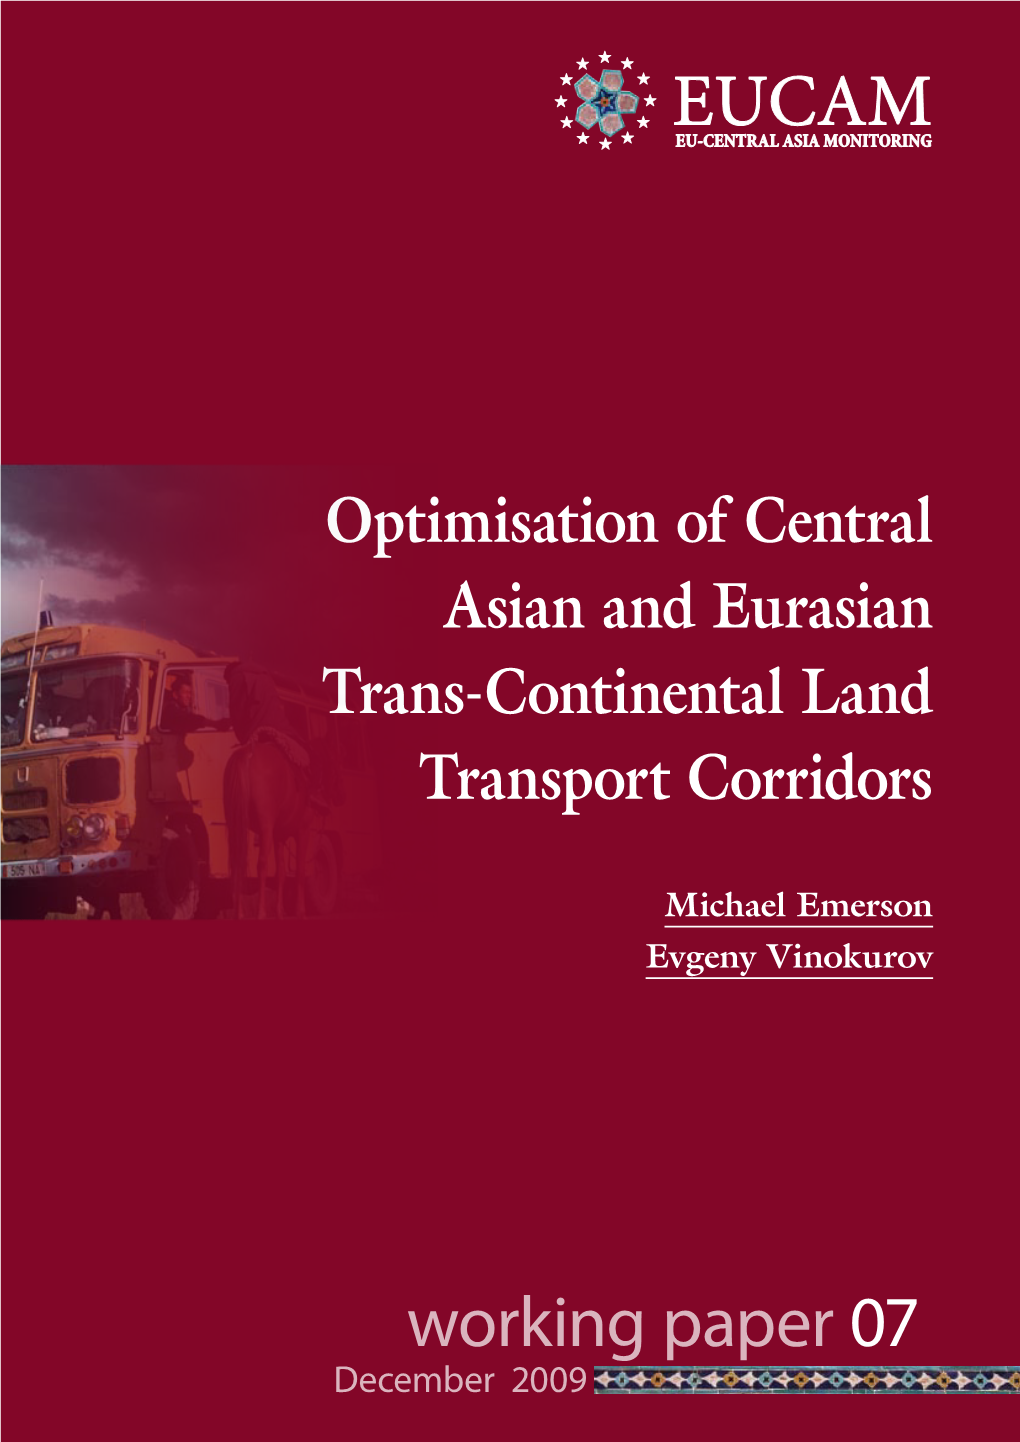 Optimisation of Central Asian and Eurasian Trans-Continental Land Transport Corridors